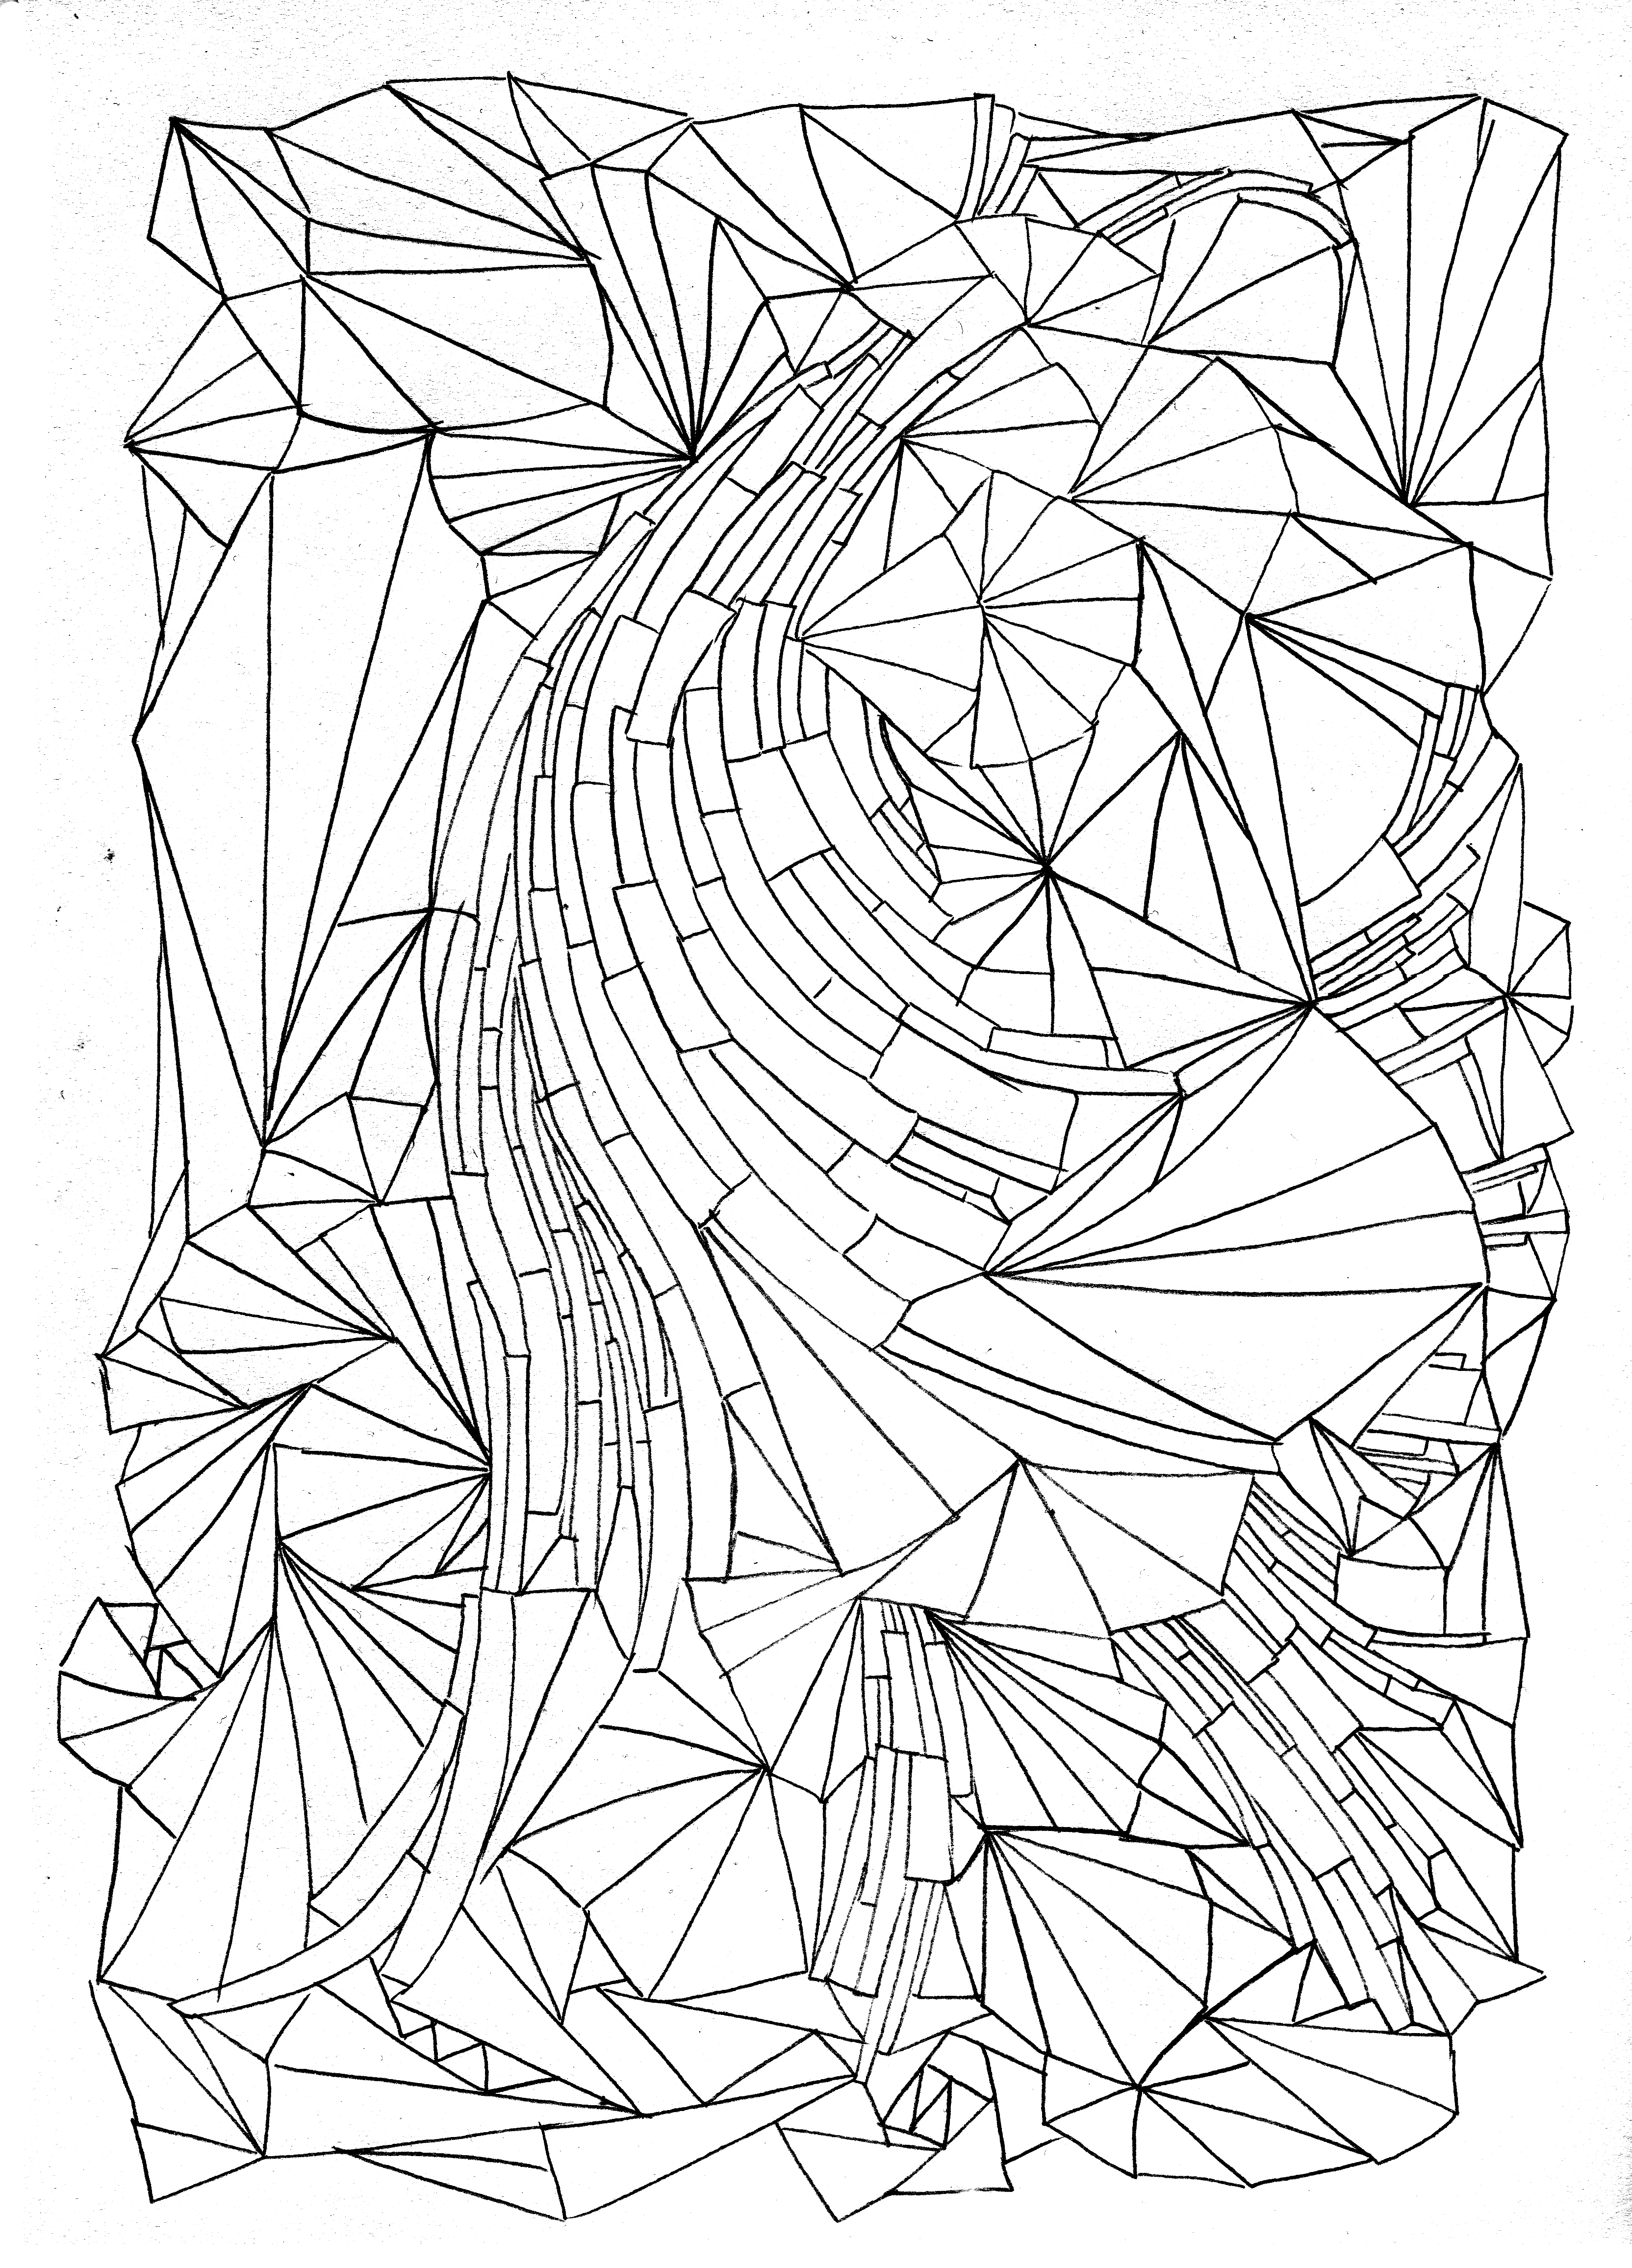 cool designs coloring pages colouring designs thelinoprinter designs cool coloring pages 